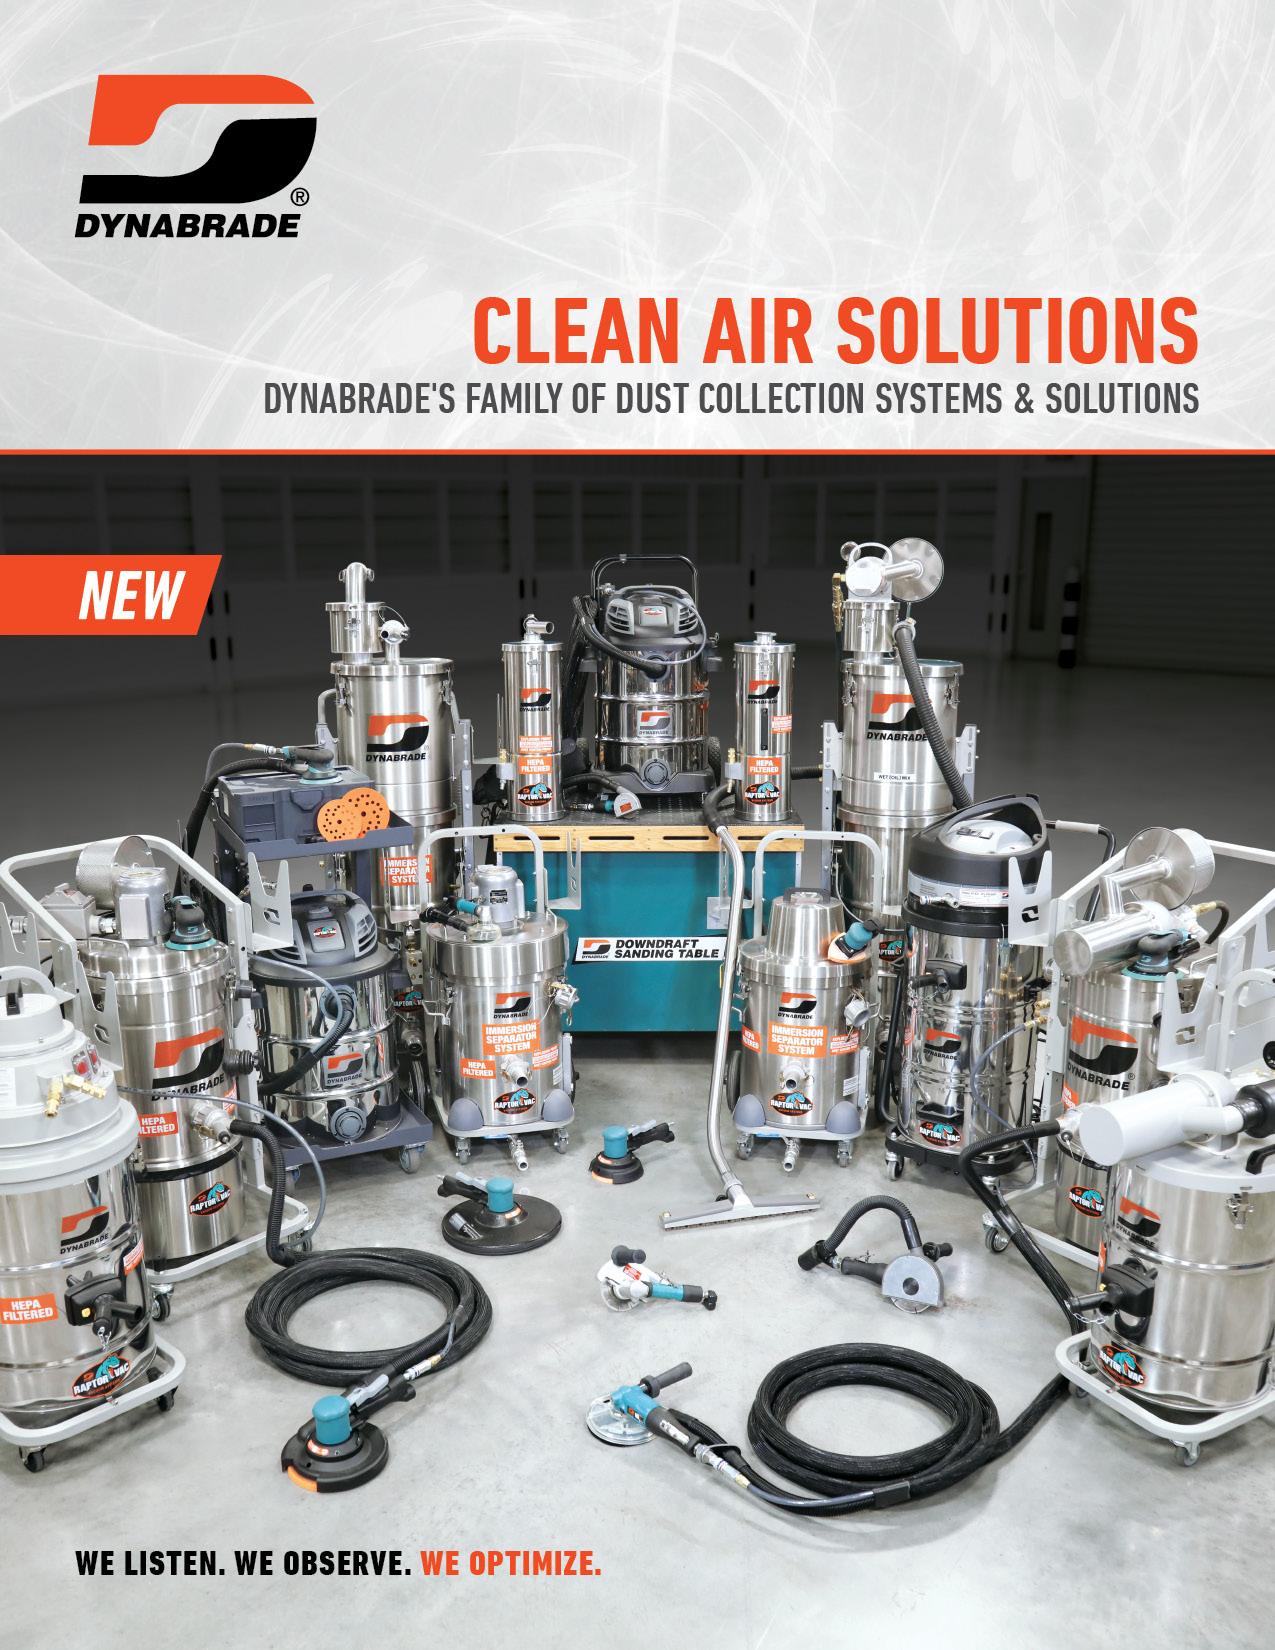 Dynabrade Clean Air Solutions